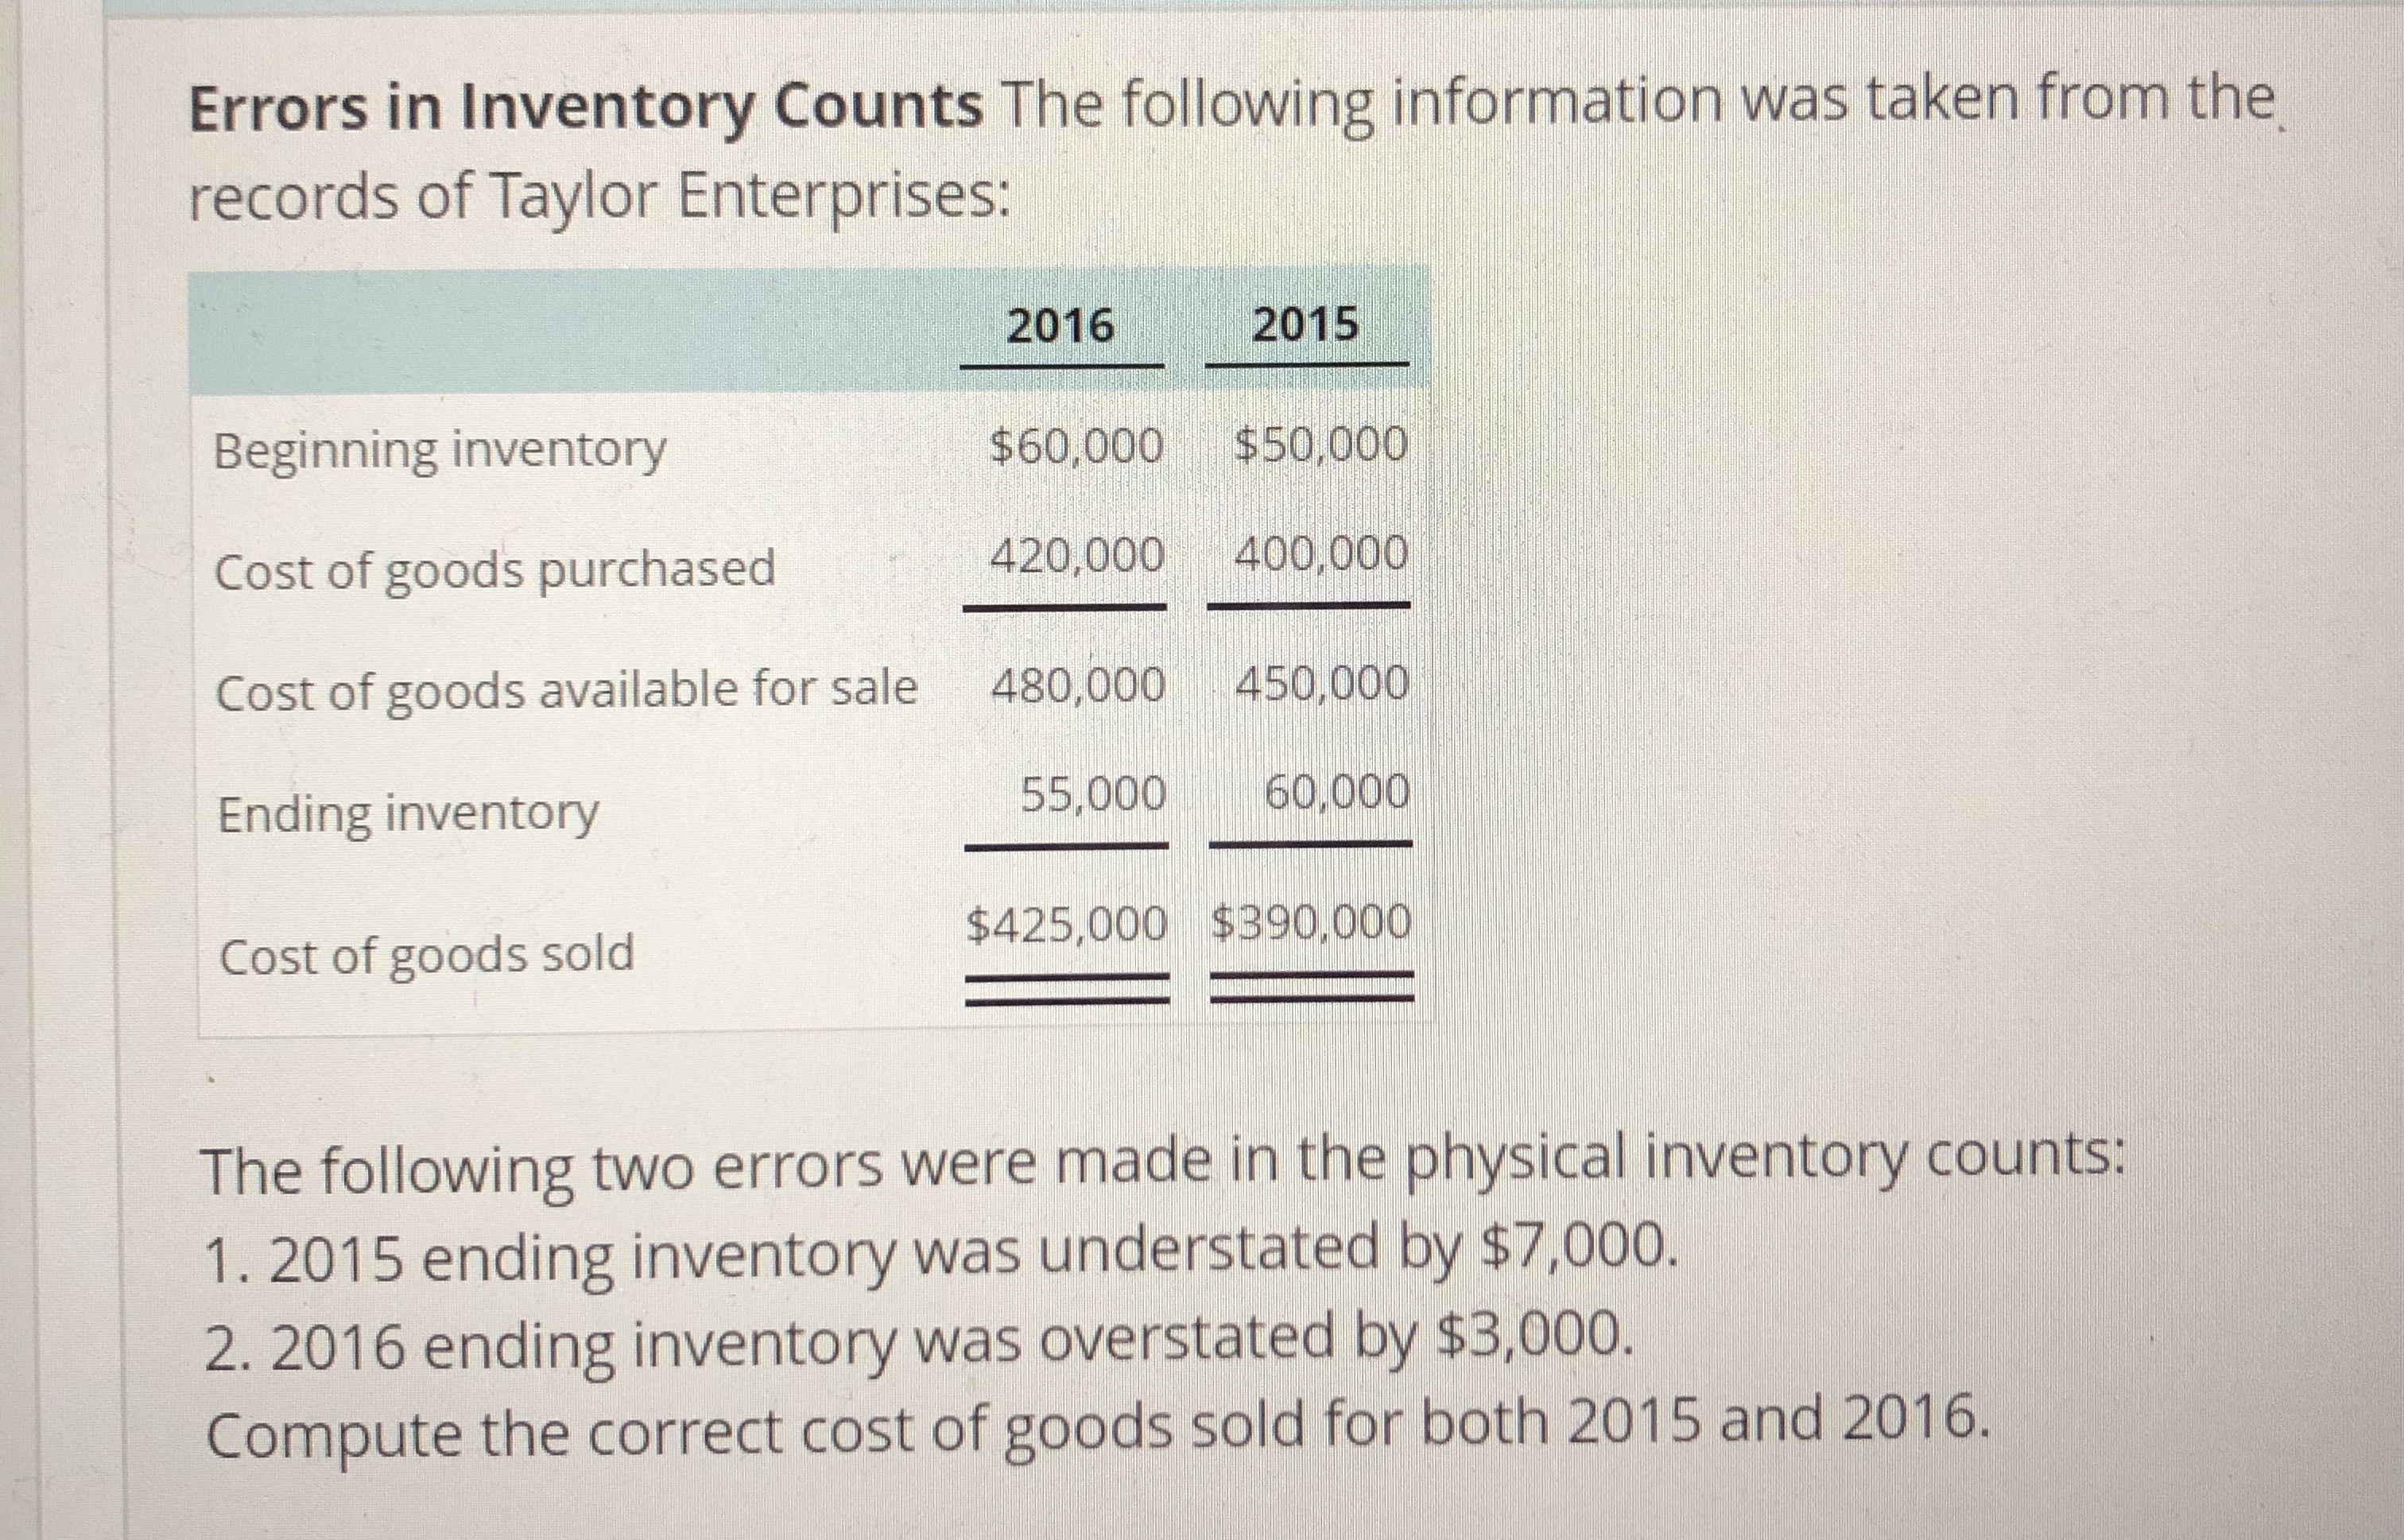 Errors in Inventory Counts The following information was taken from the
records of Taylor Enterprises:
2016
2015
$60,000 $50,000
420,000 400,000
Cost of goods available for sale 480,000 450,000
55,000 60,000
$425,000 $390,000
Beginning inventory
Cost of goods purchased
Ending inventory
Cost of goods sold
The following two errors were made in the physical inventory counts:
1. 2015 ending inventory was understated by $7,000.
2. 2016 ending inventory was overstated by $3,000.
Compute the correct cost of goods sold for both 2015 and 2016.
